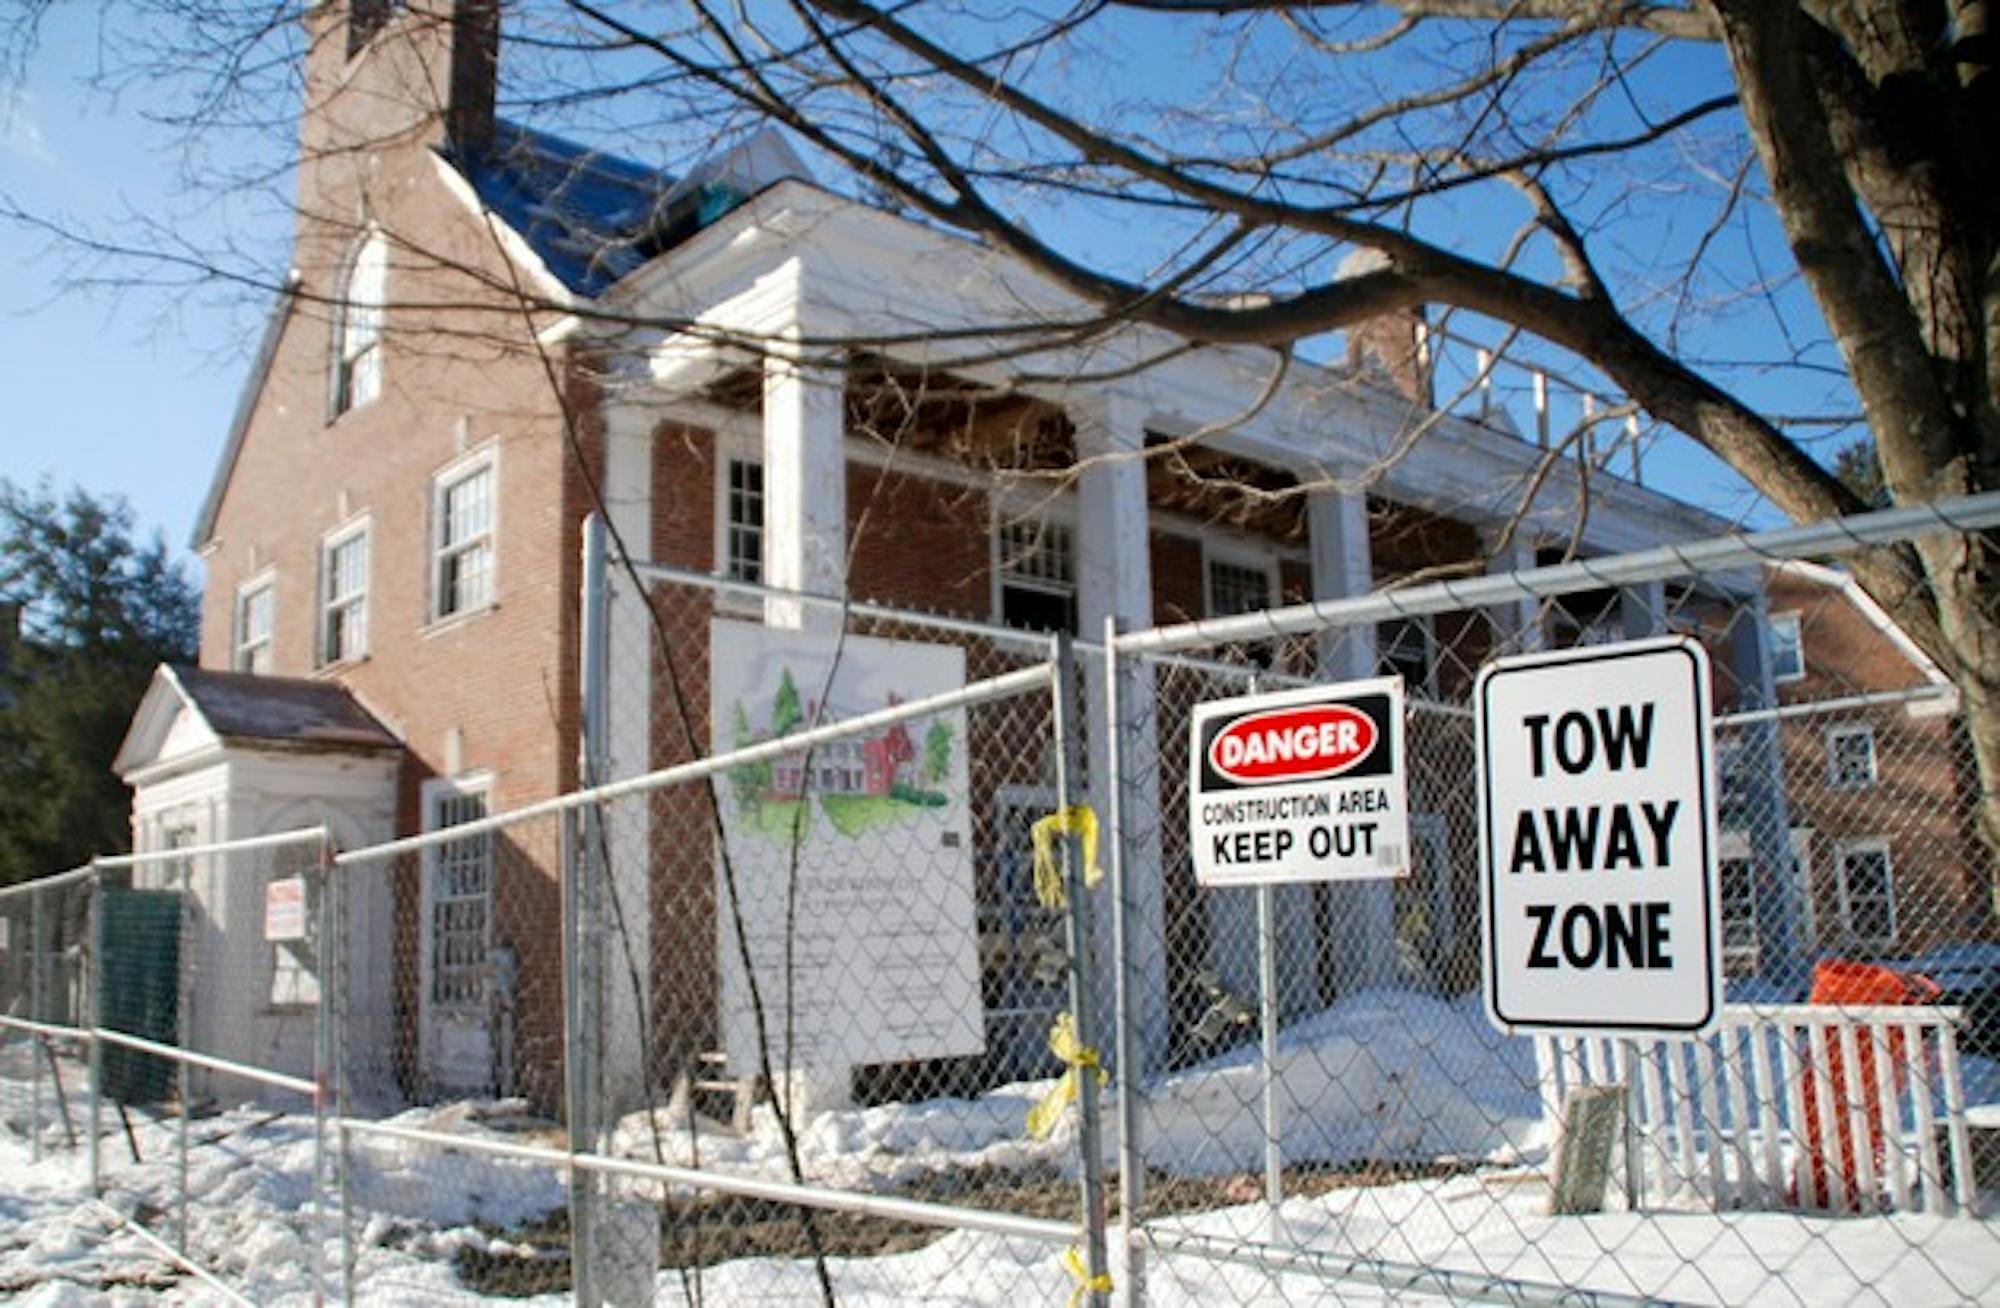 Renovation on the Zeta Psi house should be complete by Fall term 2009.